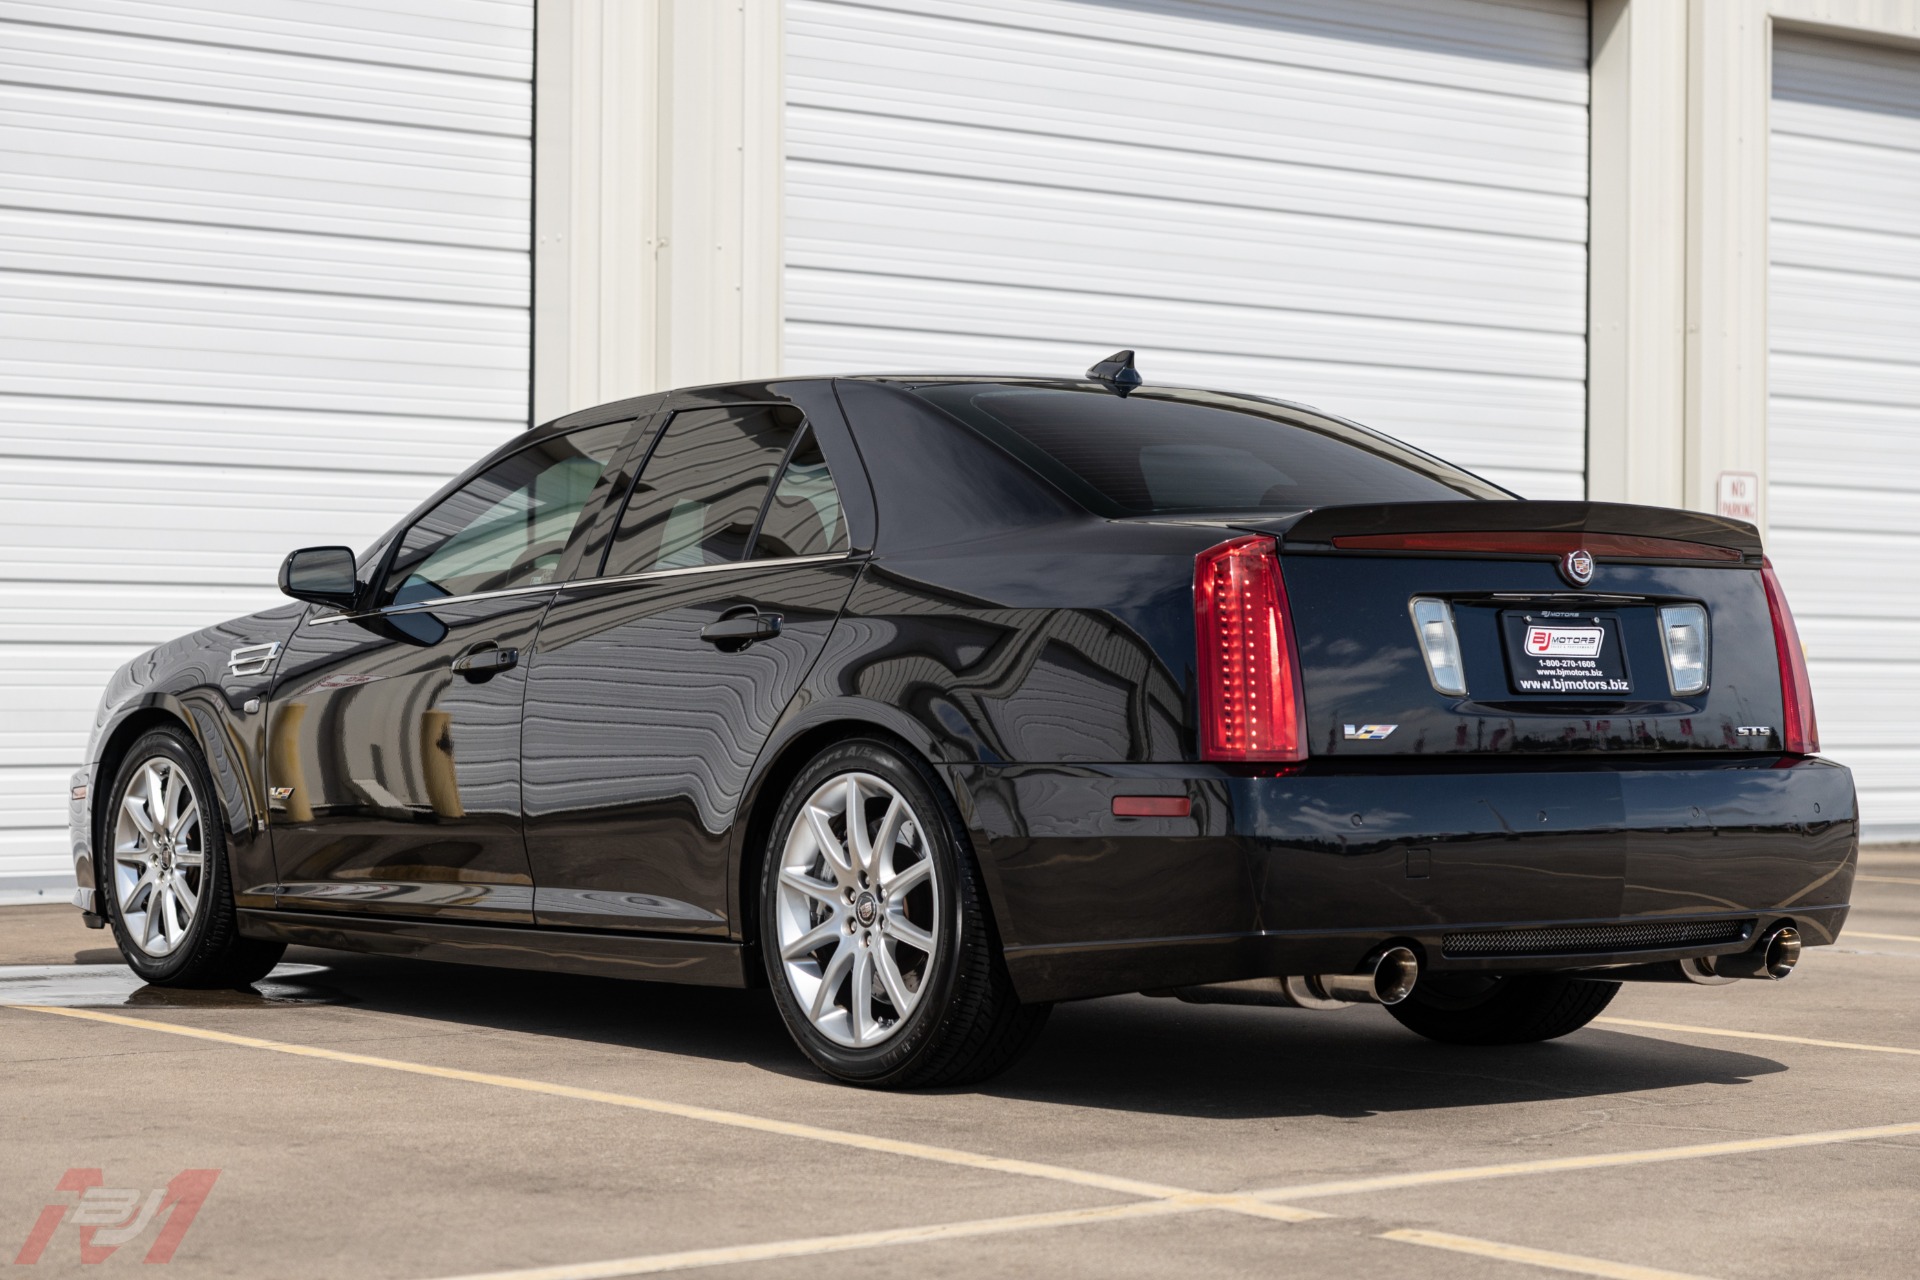 Used 2009 Cadillac STS-V V8 For Sale (Special Pricing) | BJ Motors Stock  #90100089